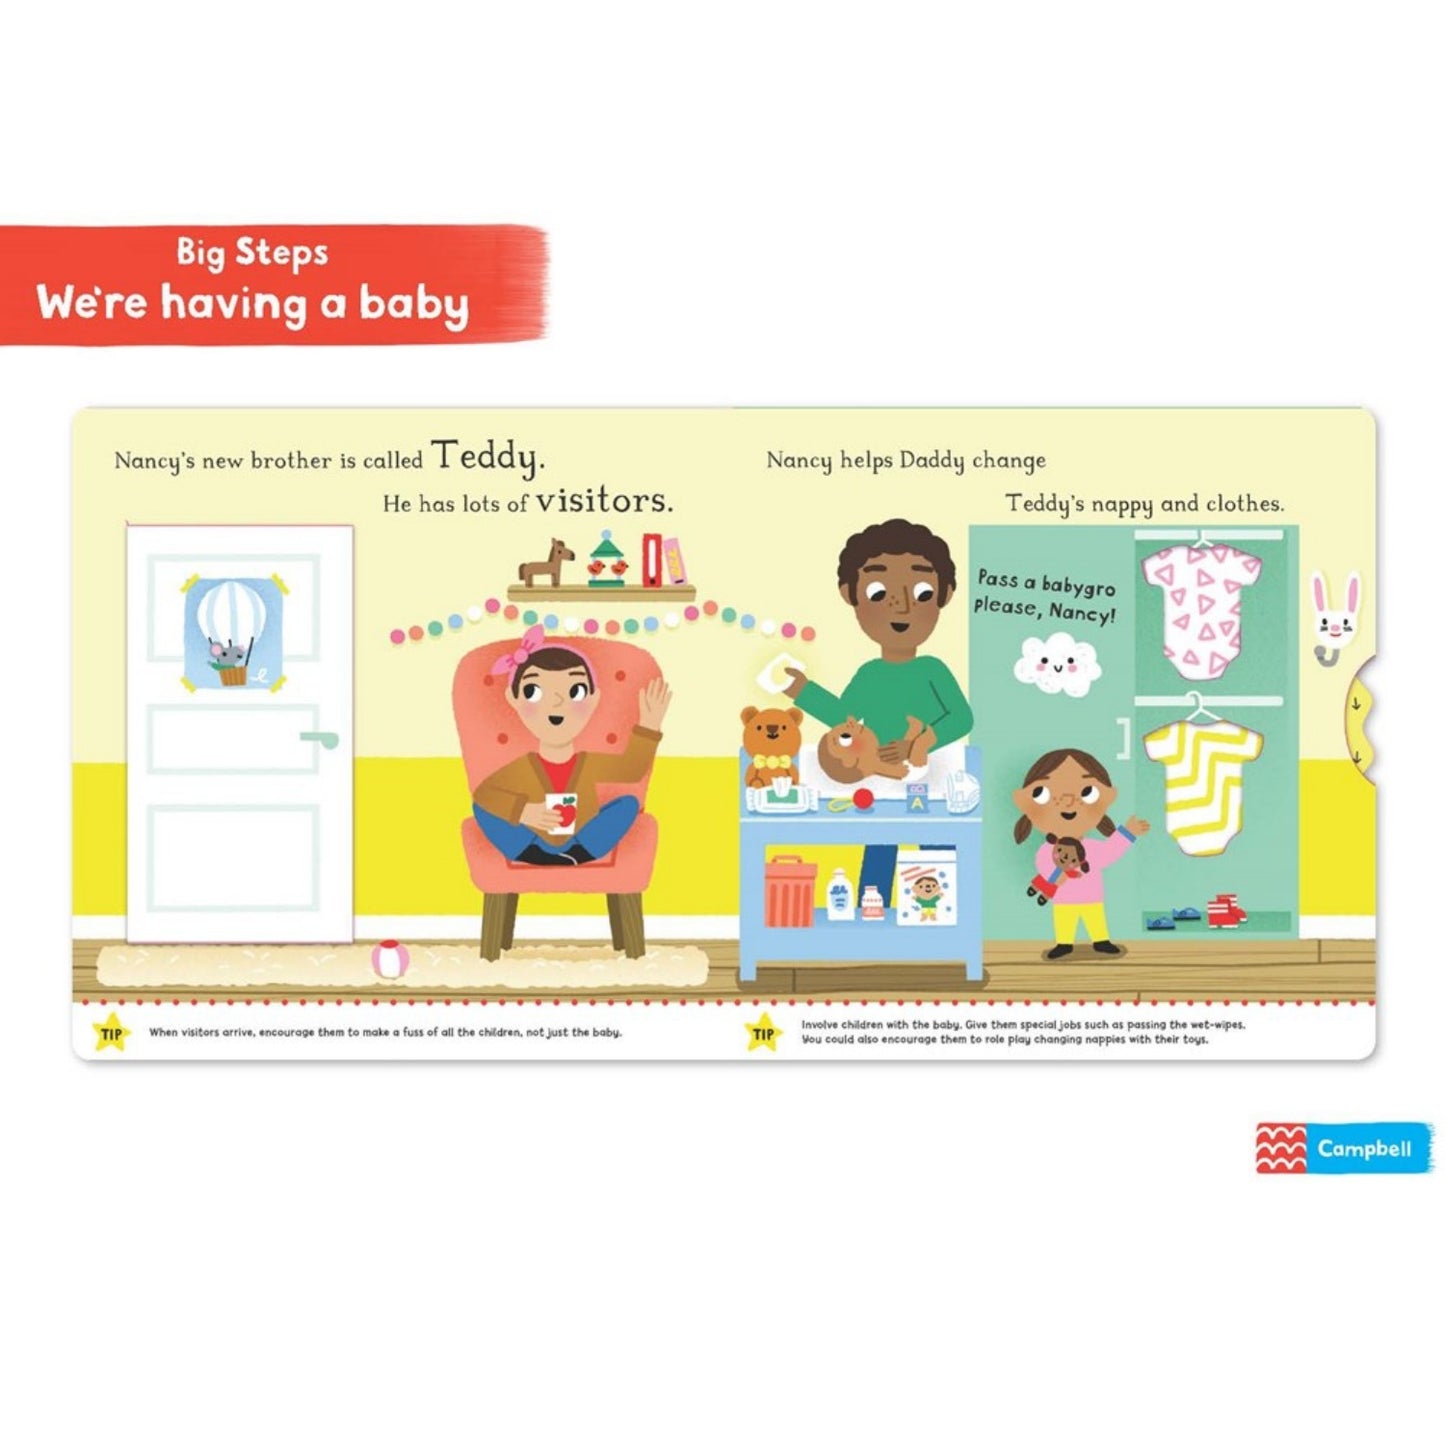 We're Having a Baby - Adapting To A New Baby | Board Book